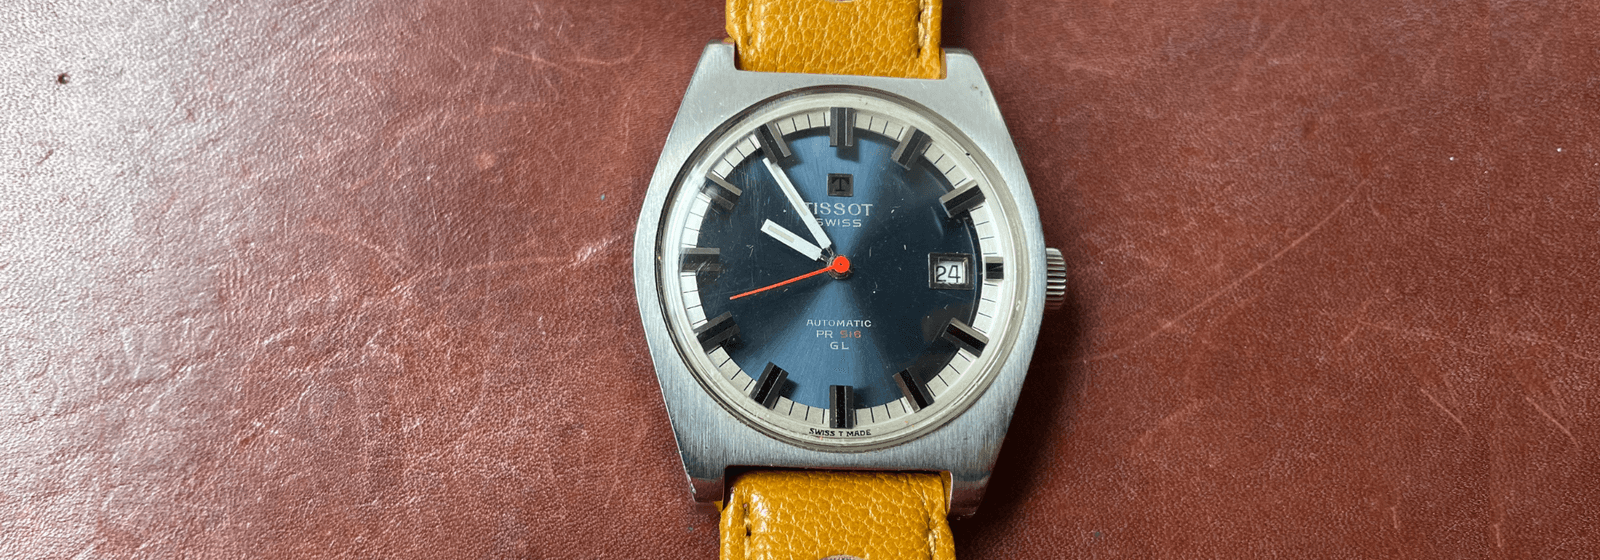 THM’s Collector’s Corner With Gregory Selch: Top 5 Vintage Timepieces